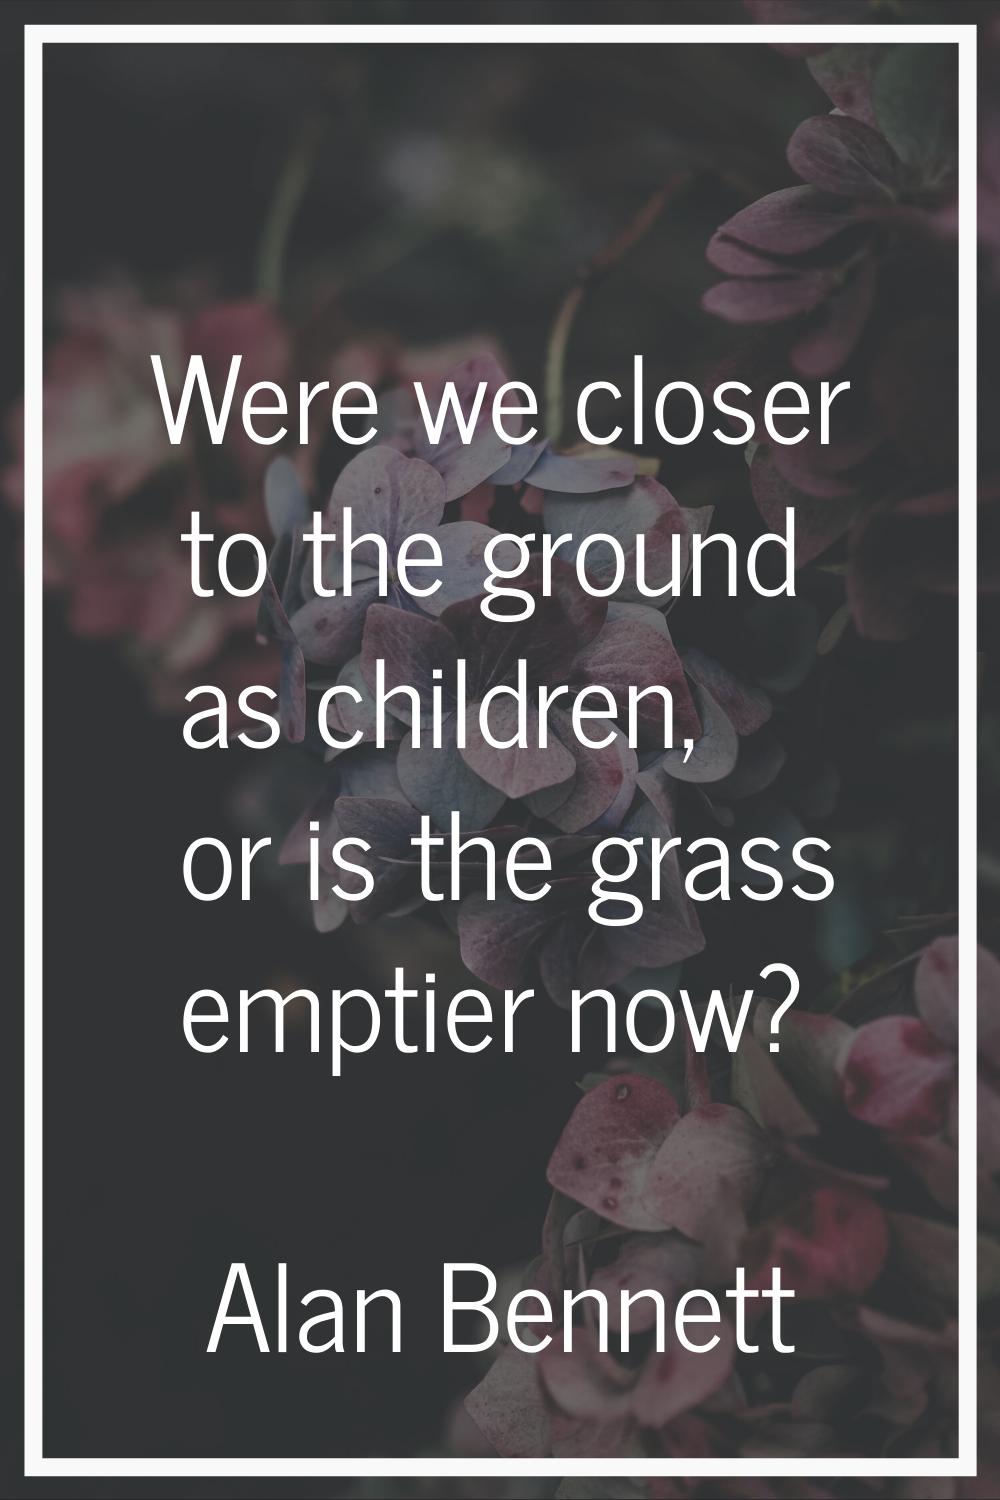 Were we closer to the ground as children, or is the grass emptier now?